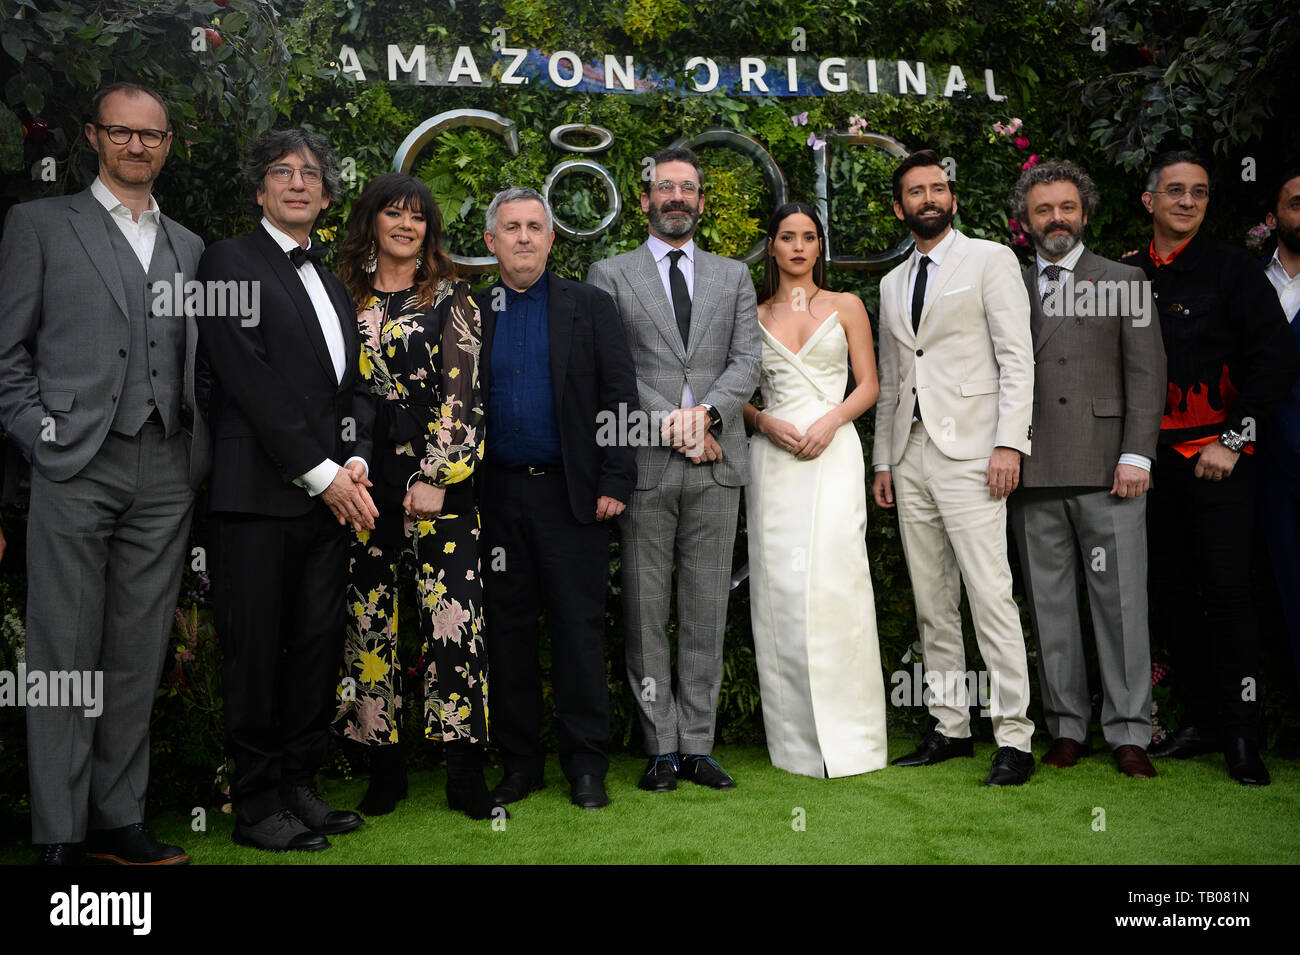 (from second left to right) Writer Neil Gaiman, Josie Lawrence, Director Douglas Mackinnion, Jon Hamm, Adria Arjona, David Tennant, Michael Sheen and Producer Rob Wilkins attending the premiere of Good Omens at the Odeon Luxe Leicester Square, central London. Stock Photo